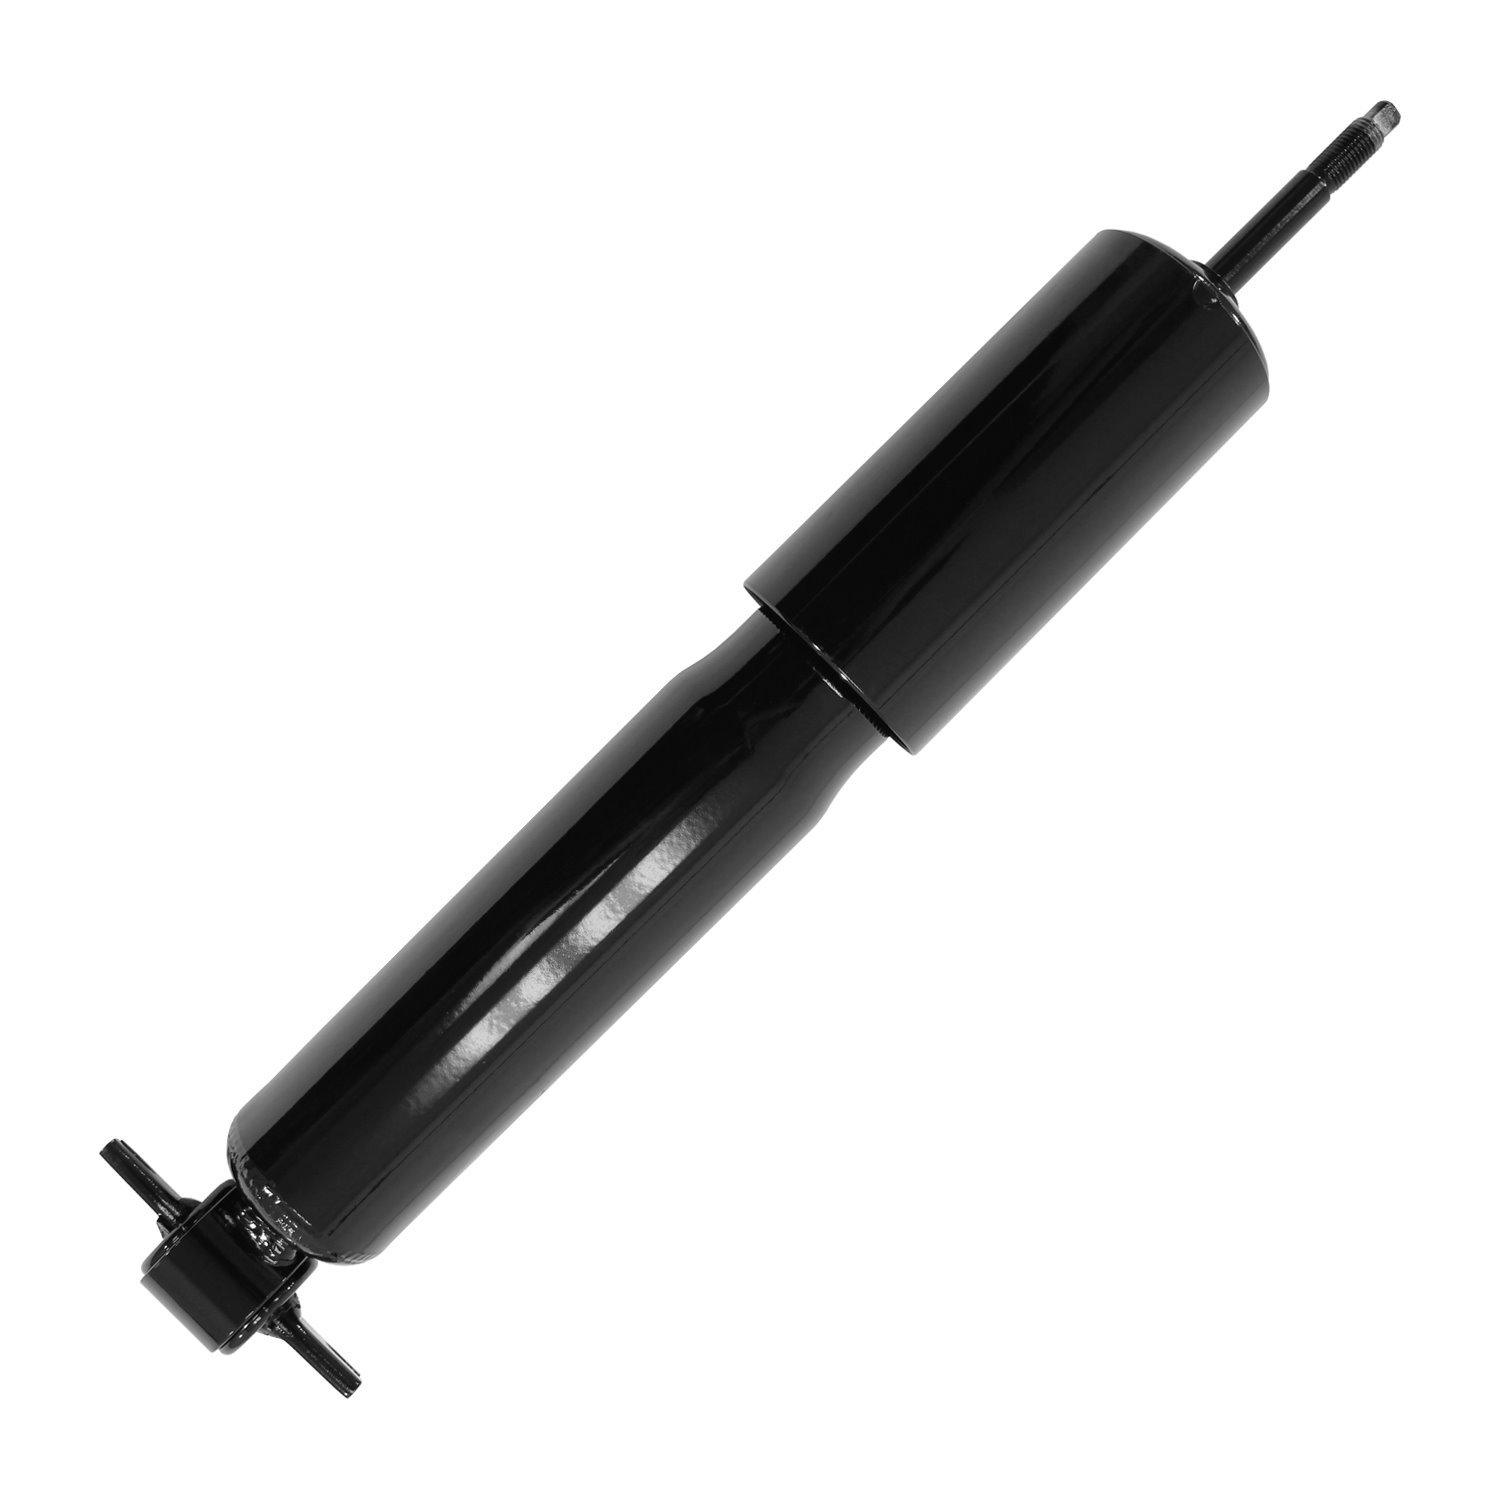 213130 Gas Charged Shock Absorber Fits Select Ford Ranger, Mazda B2300, Mazda B2500, Mazda B3000, Mazda B4000